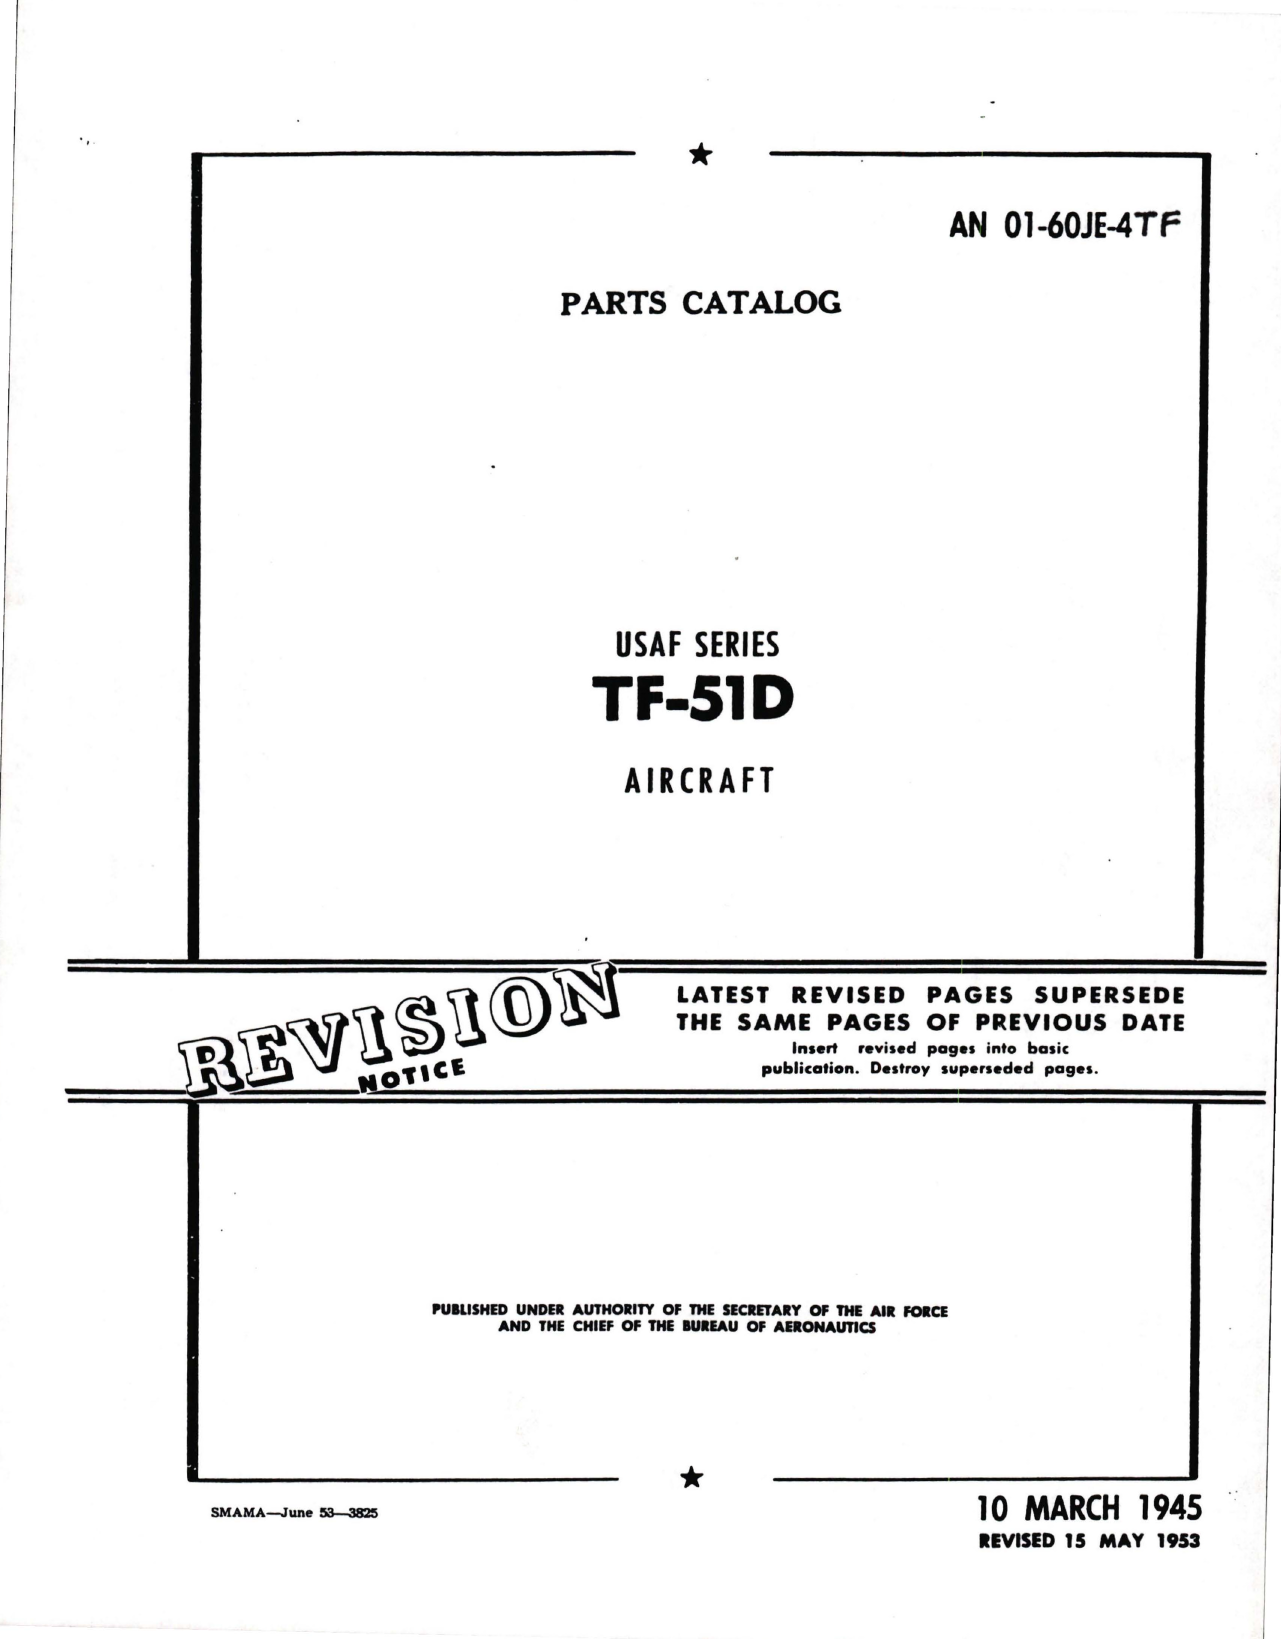 Sample page 1 from AirCorps Library document: Parts Catalog for TF-51D